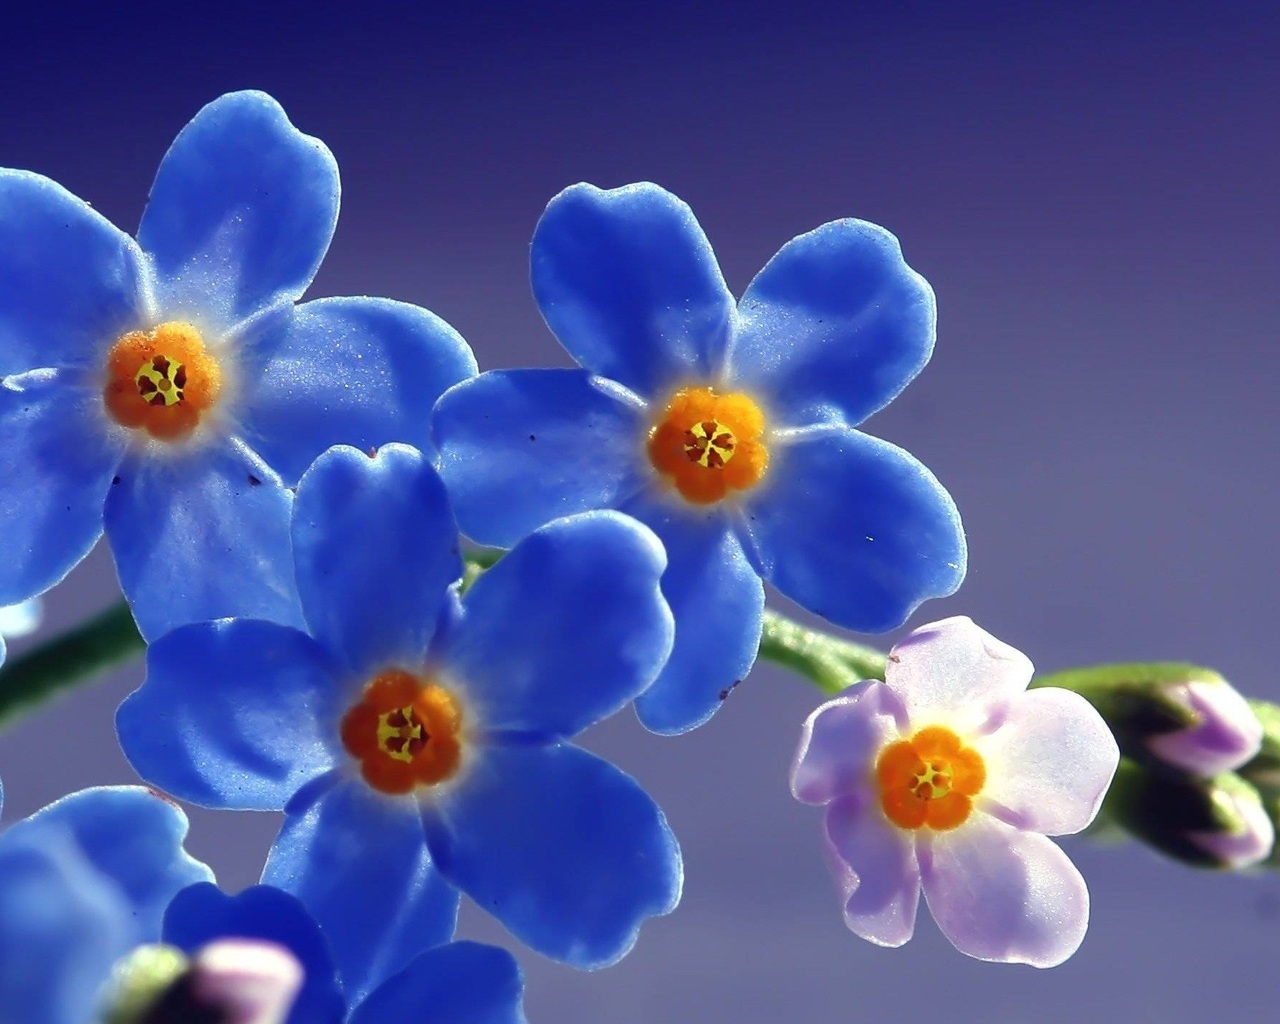 Blue Forget Me Not Flower for 1280 x 1024 resolution